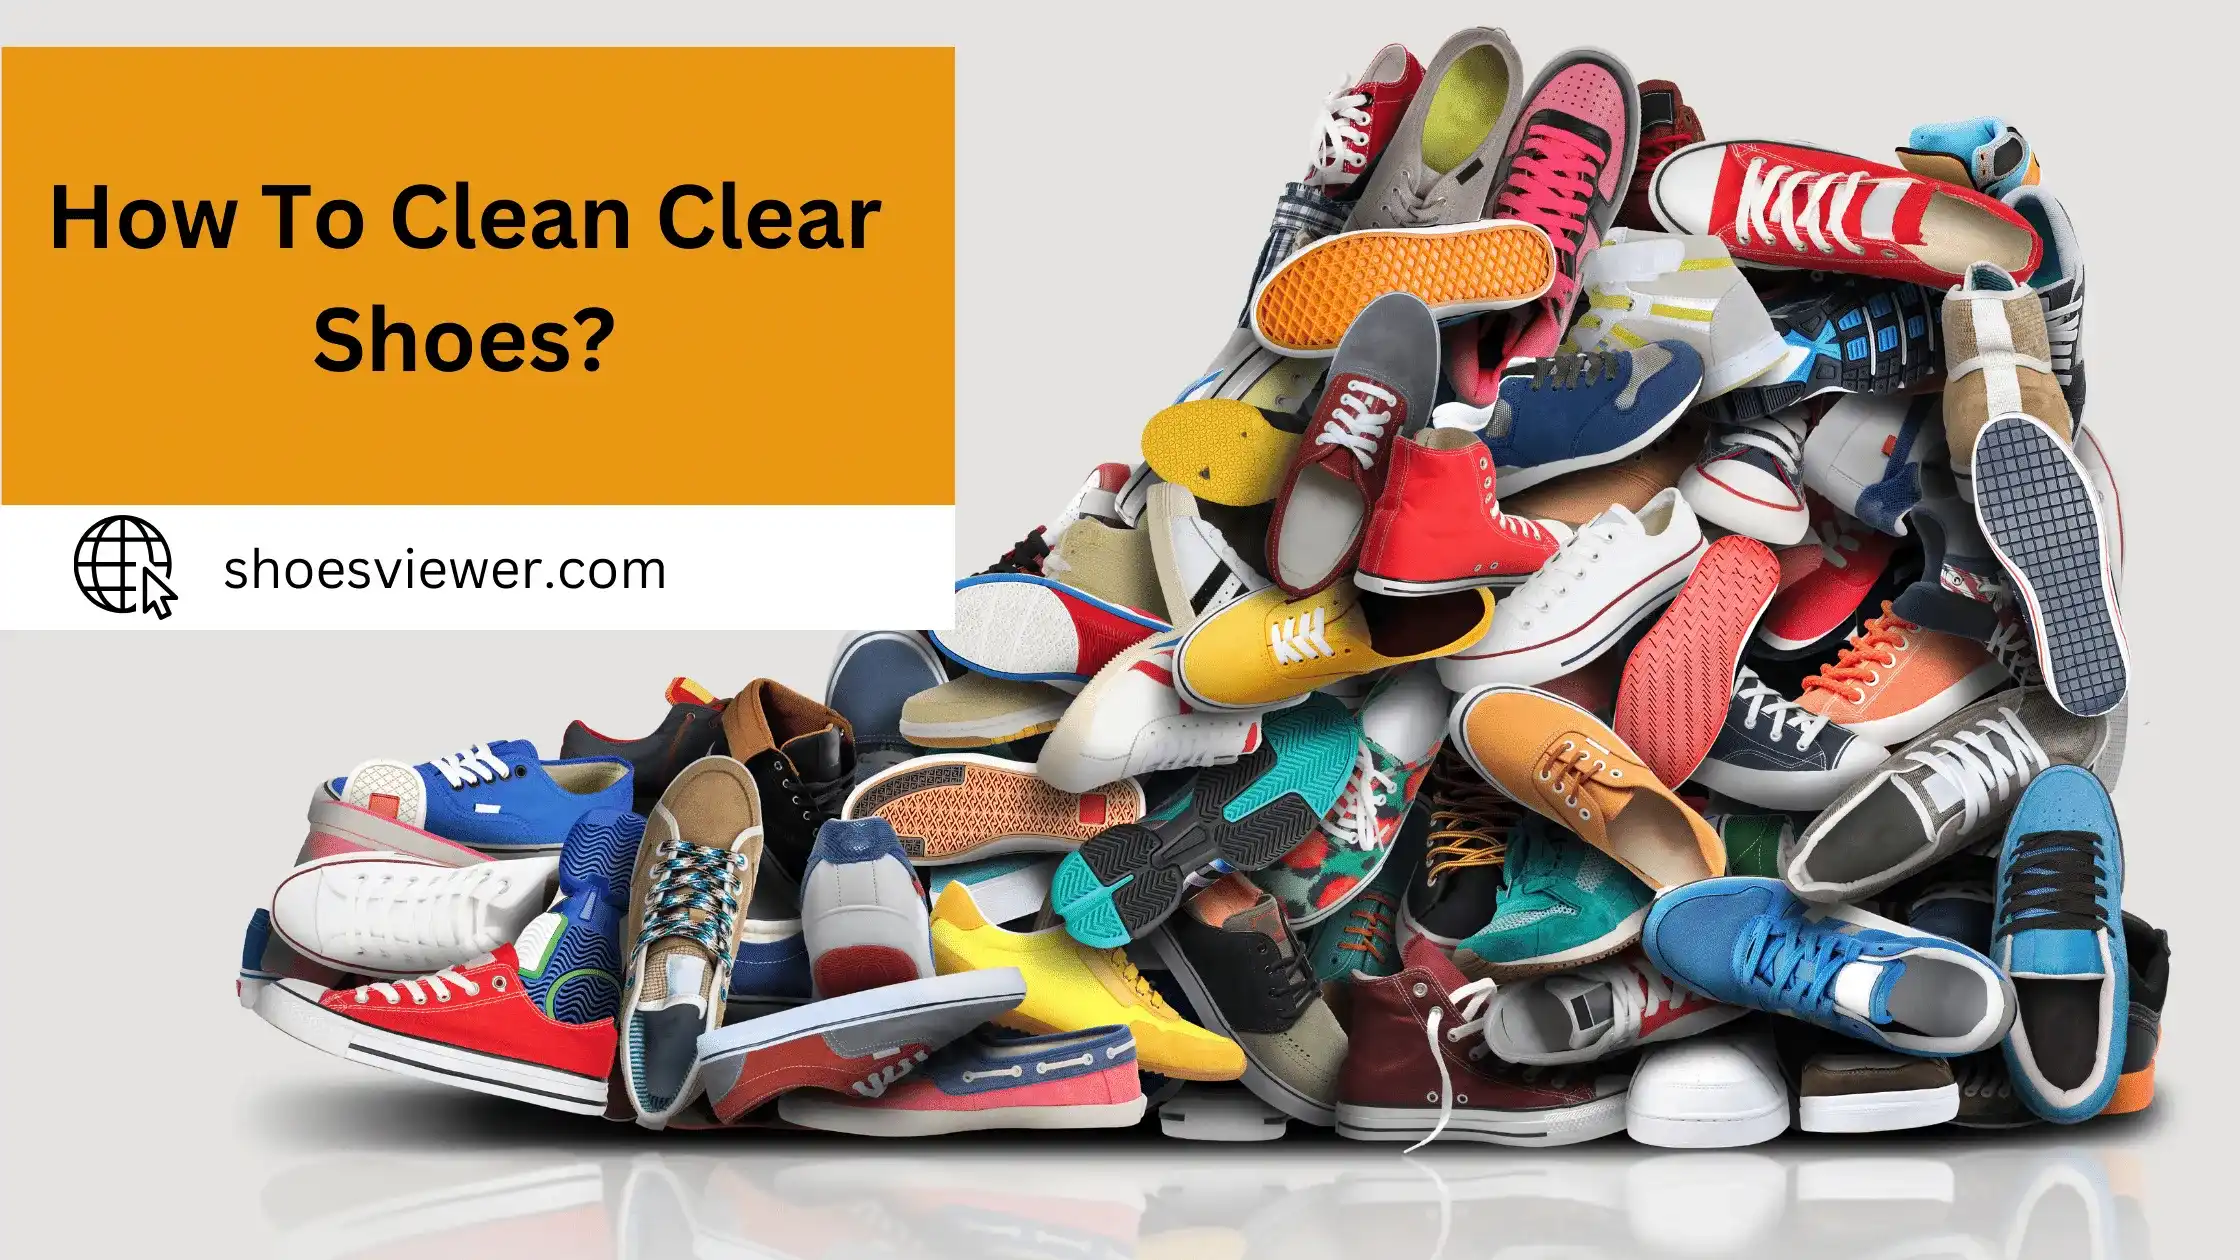 How To Clean Clear Shoes? Cleaning Instructions